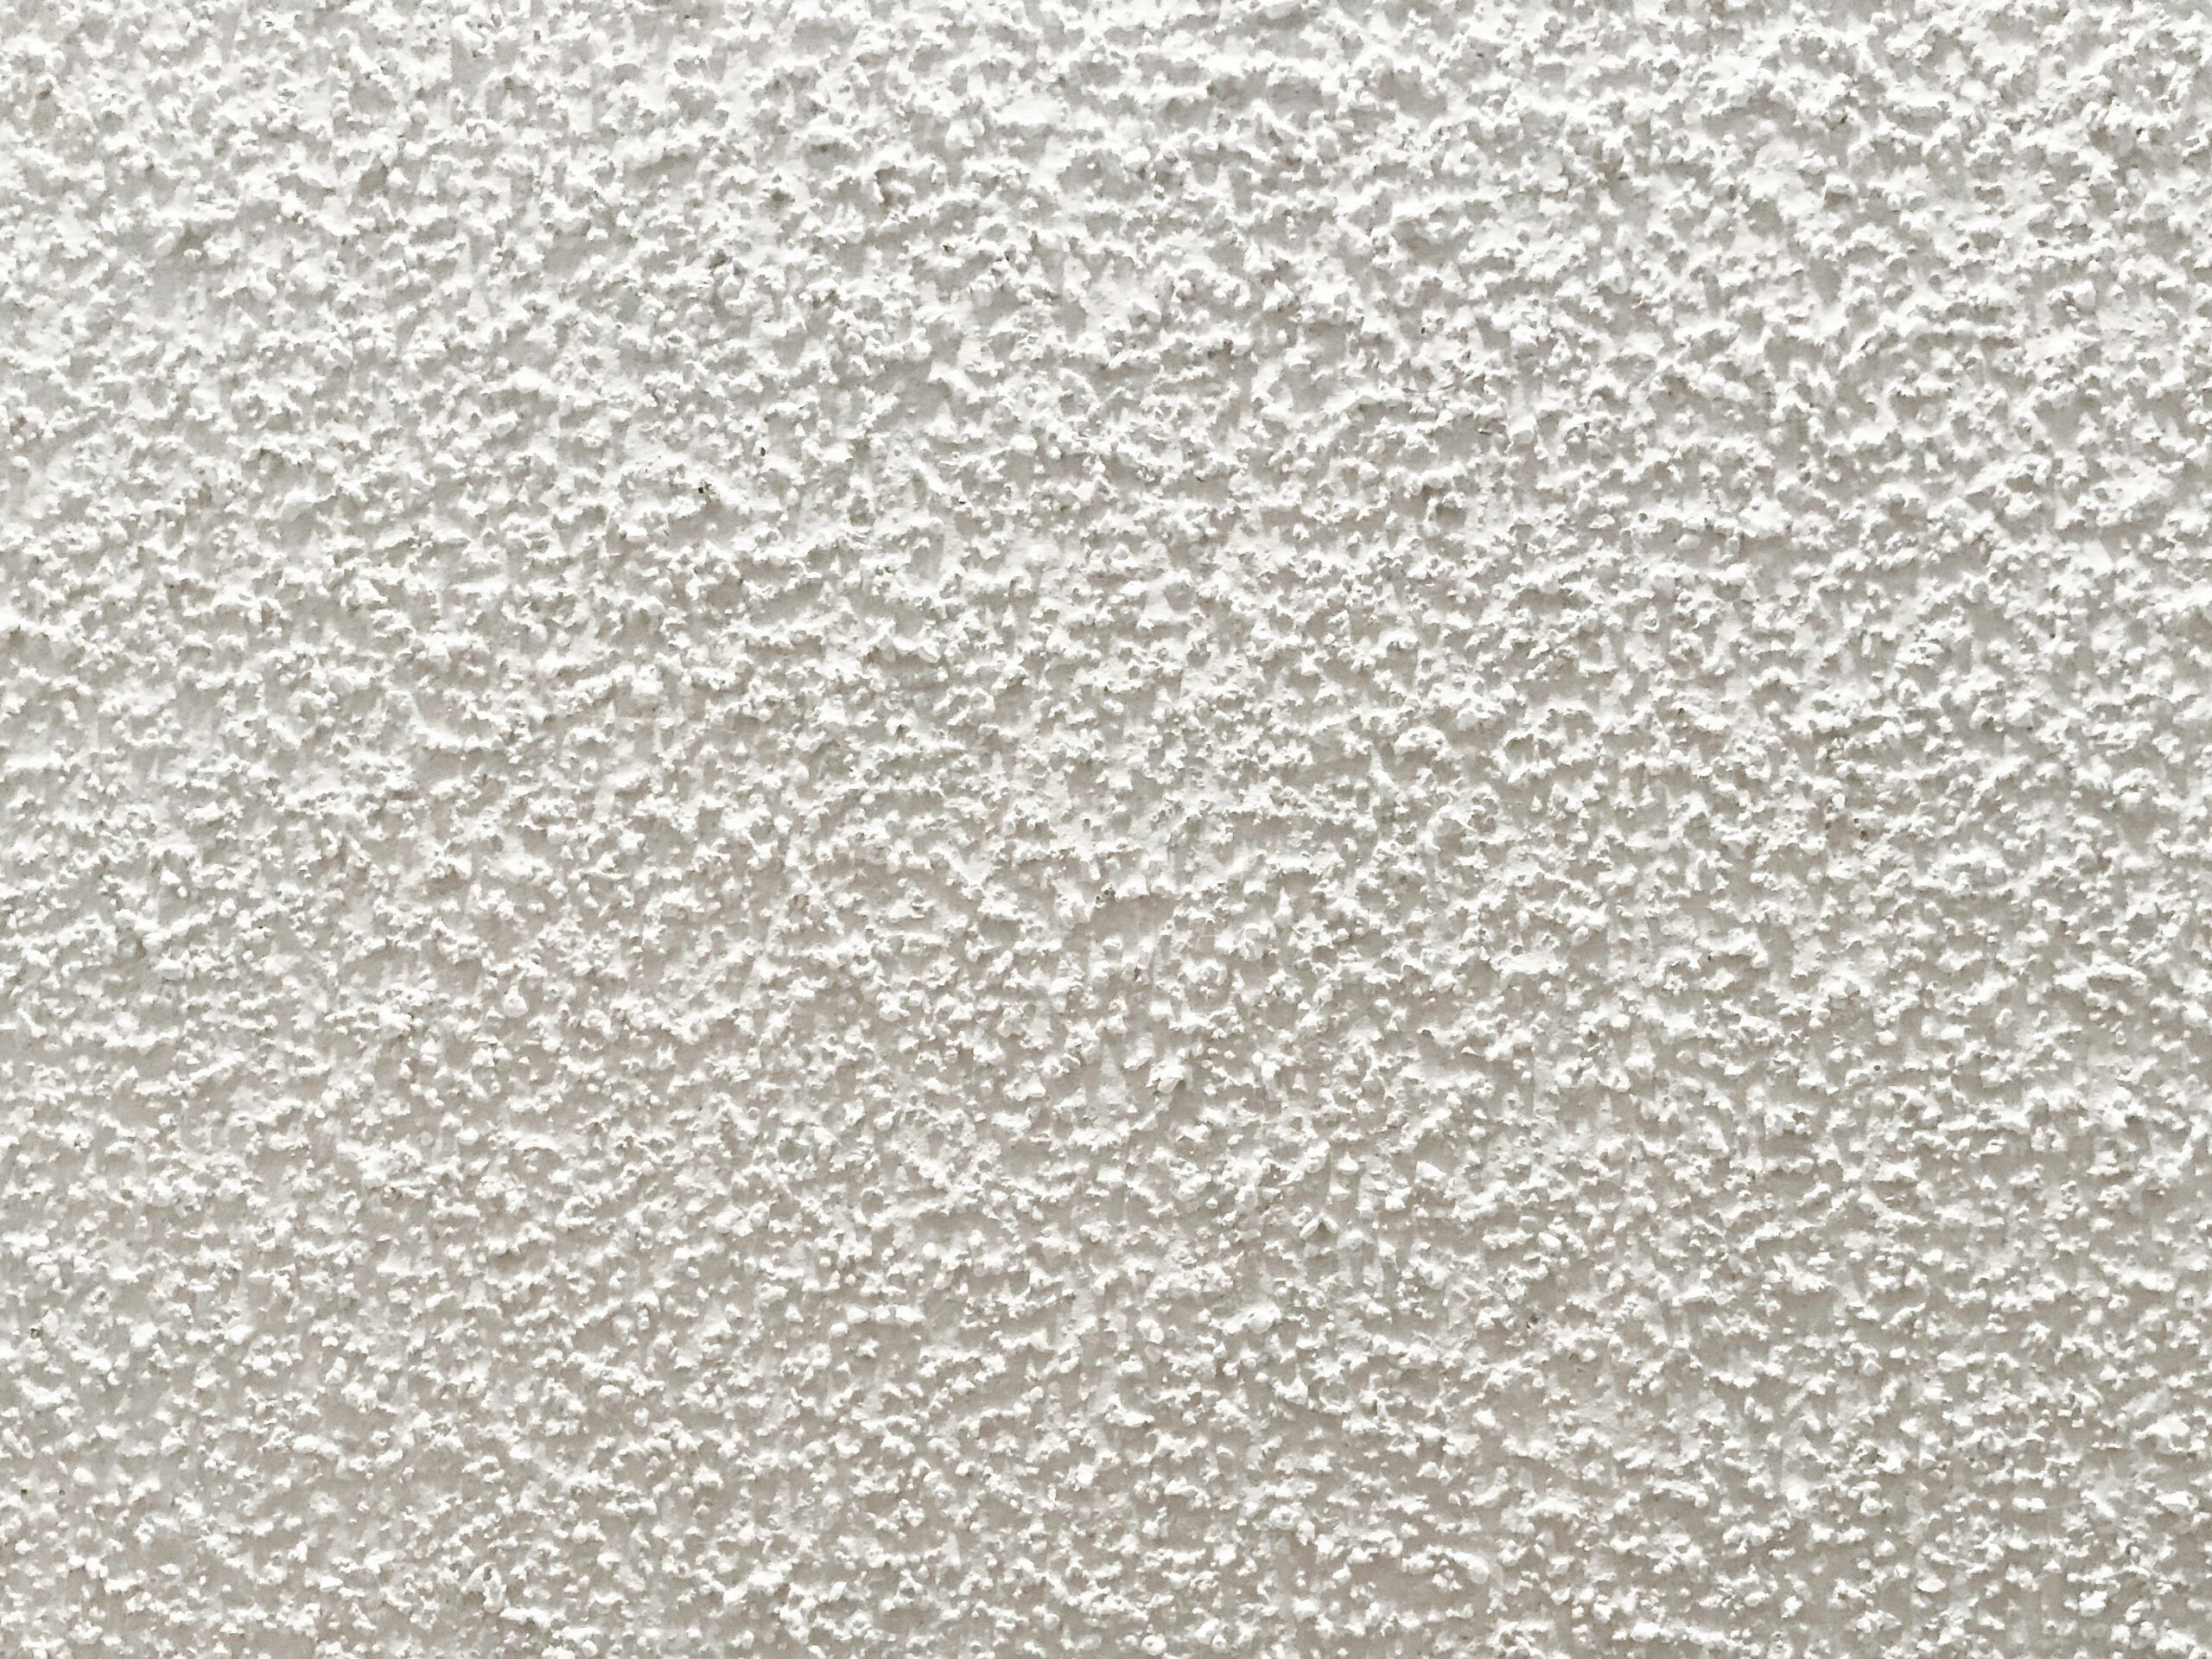 How to Texture a Wall: 4 Methods  Ceiling texture, Wall texture types, Textured  paint rollers